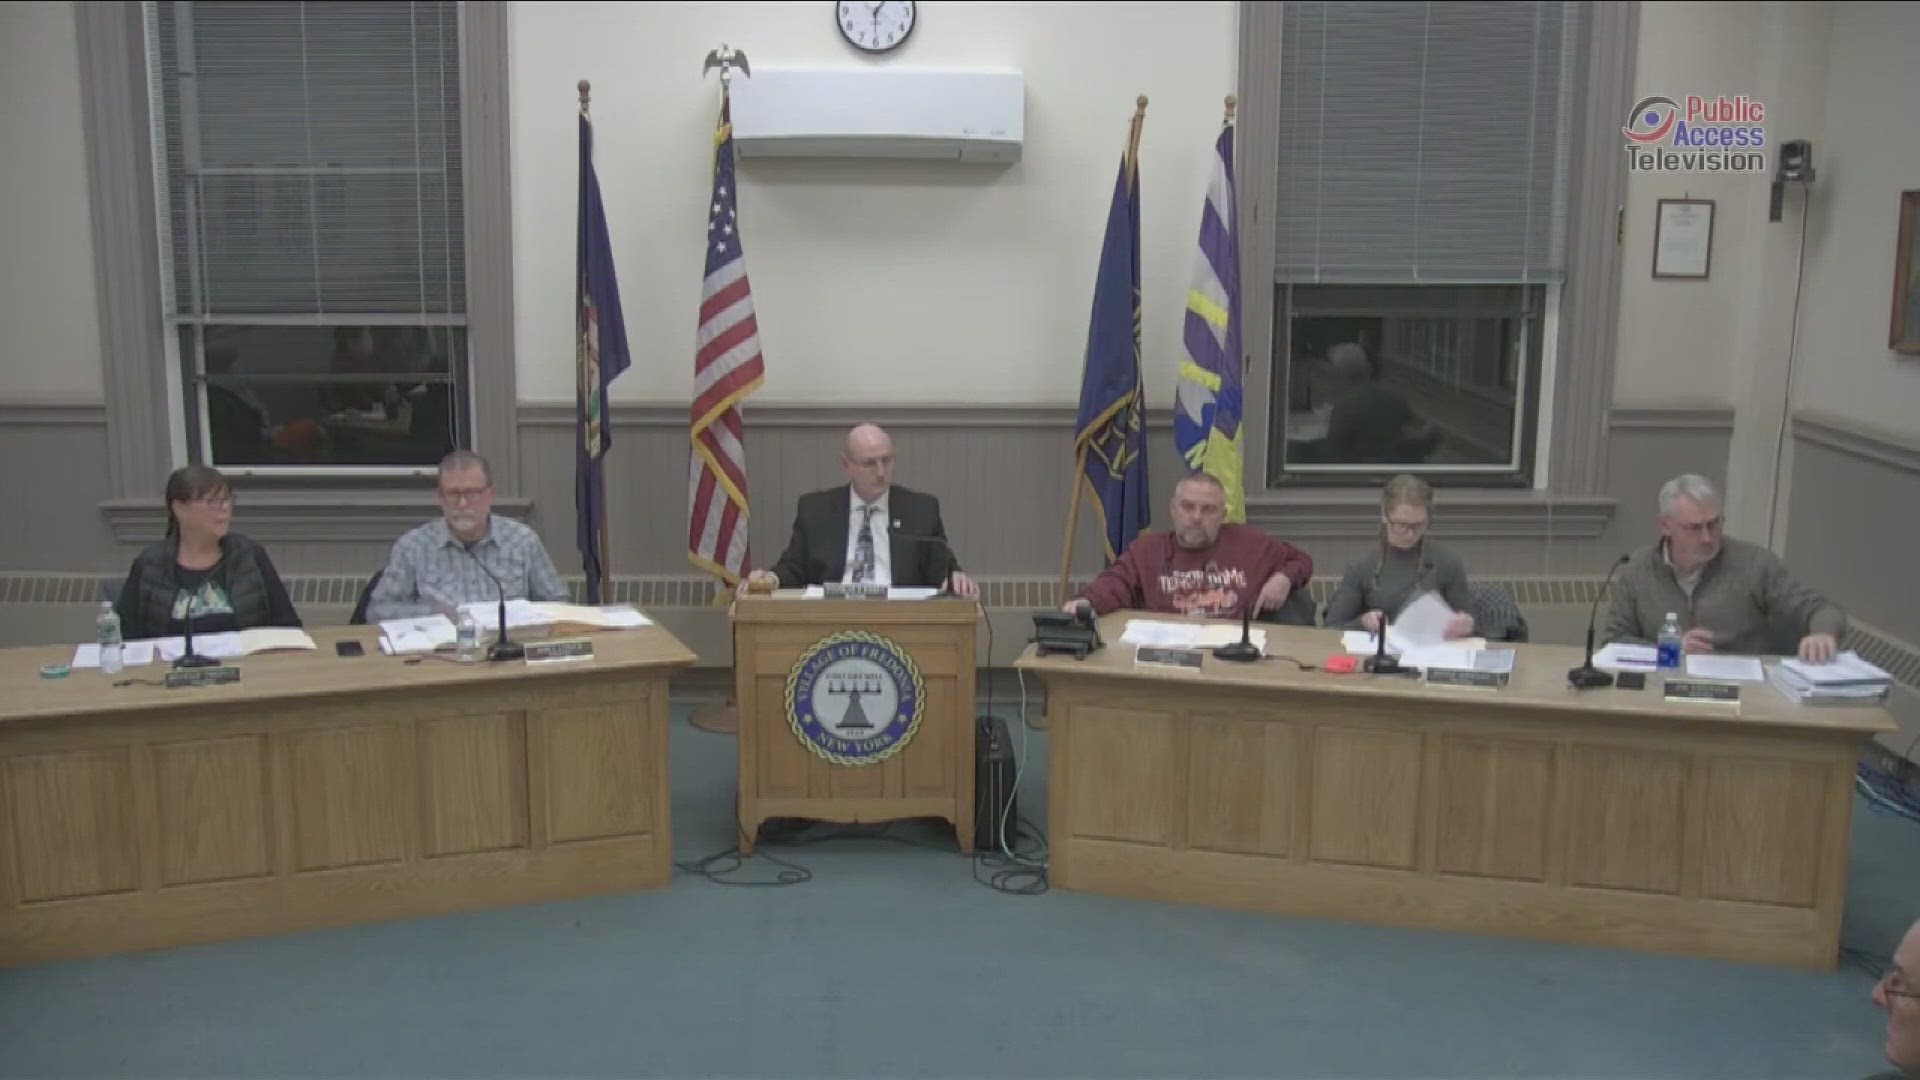 The Village of Fredonia Trustees were given three options for the future of their water supply